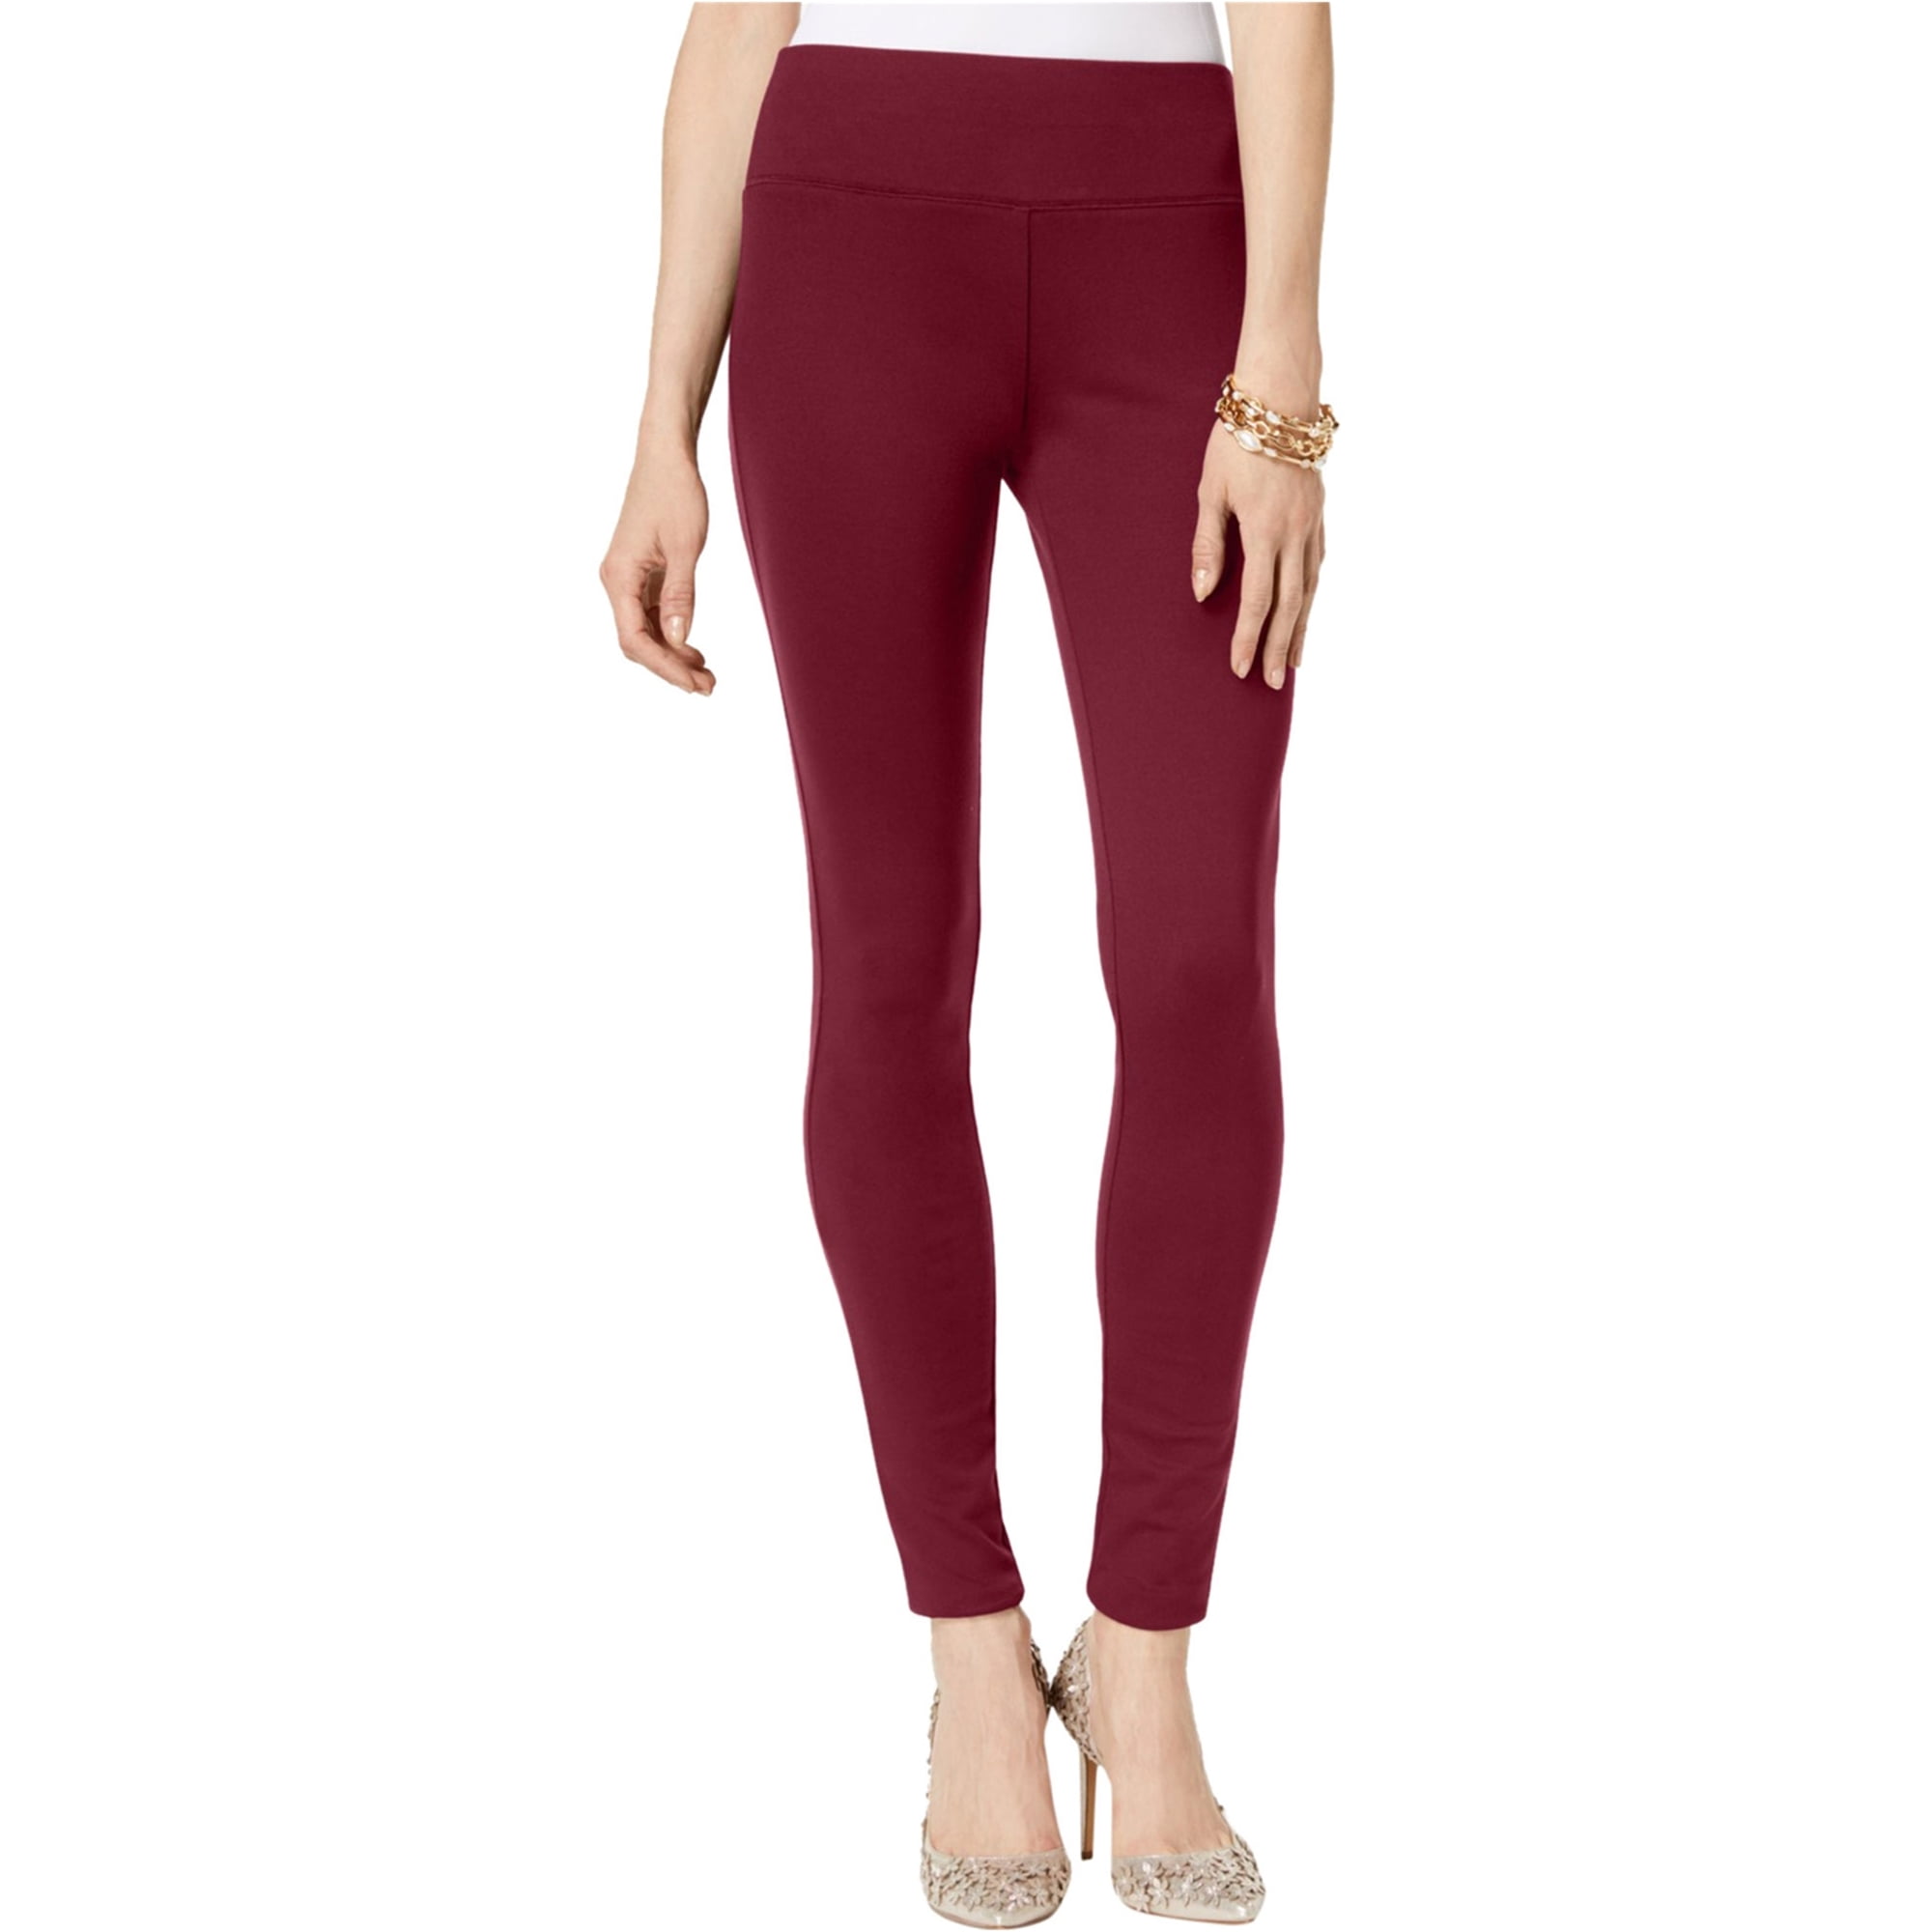 Discover more than 254 juliet ankle length leggings best